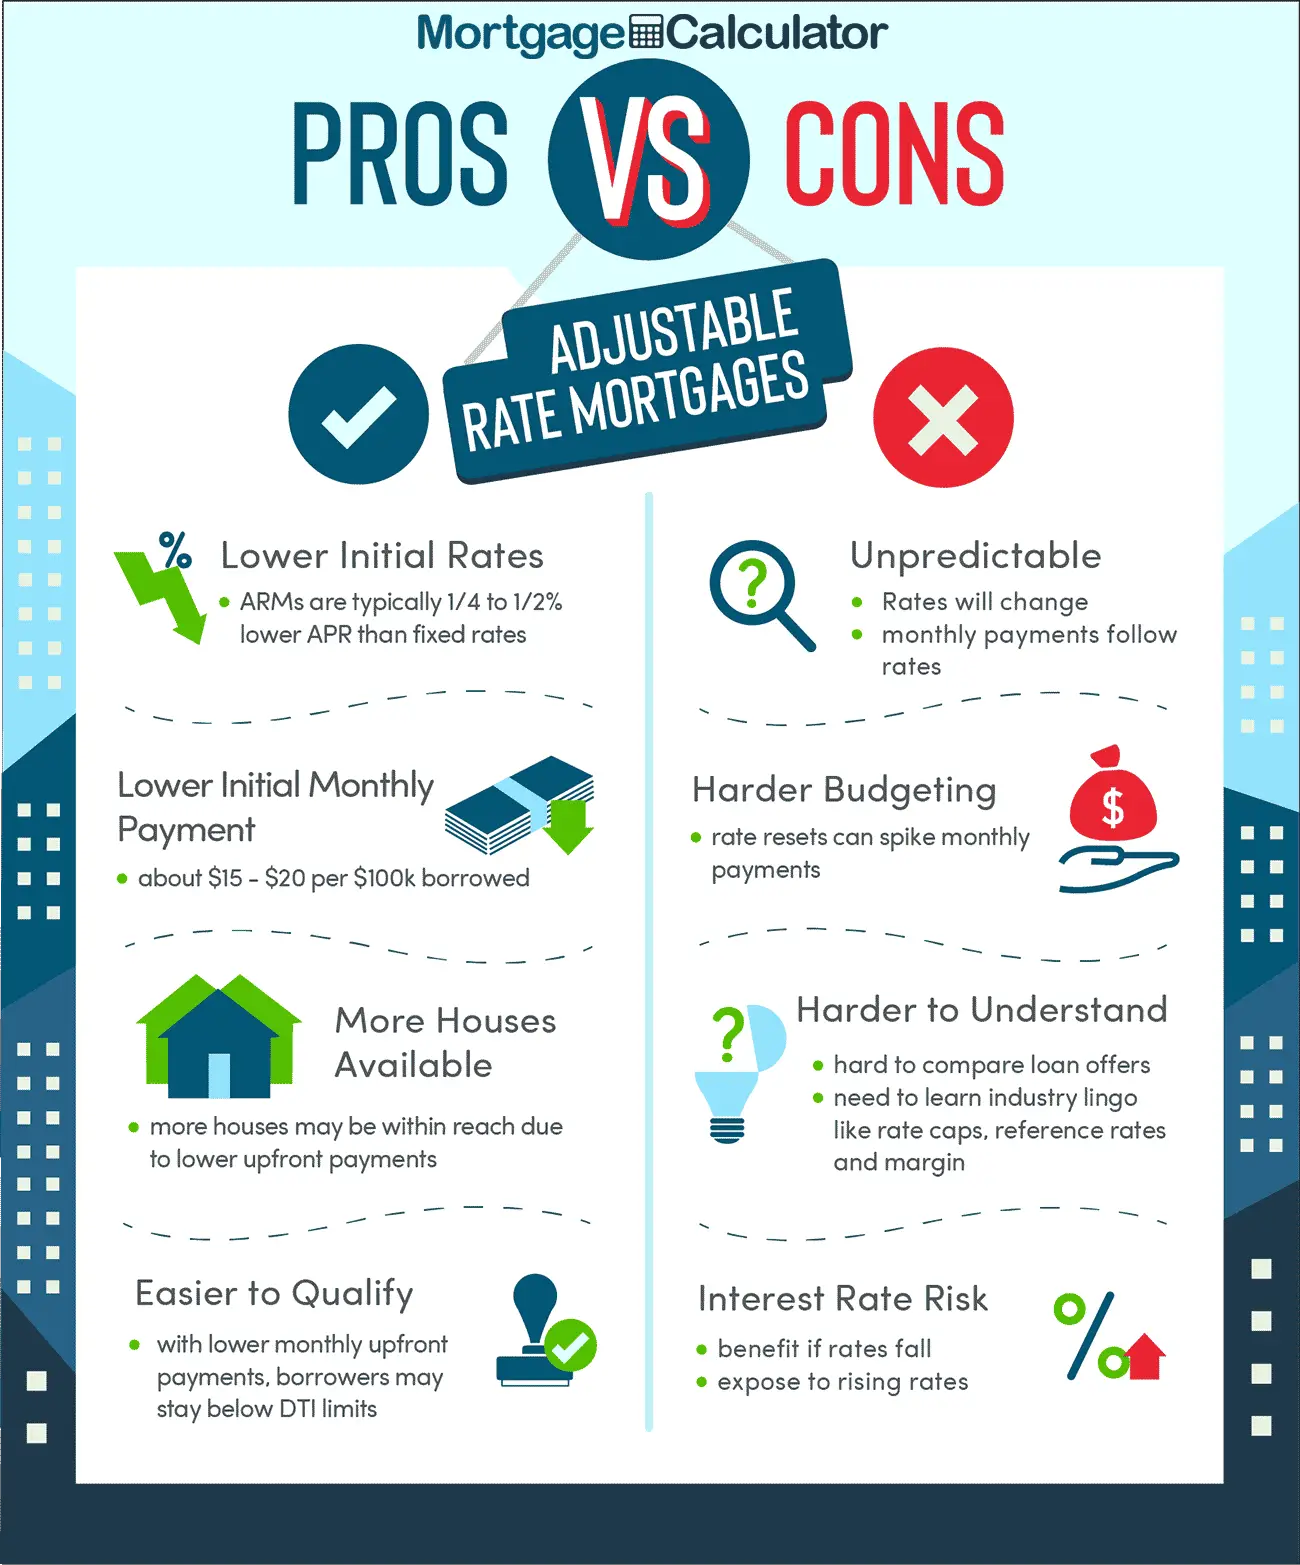 Pros and Cons of Adjustable Rate Mortgages. in 2021